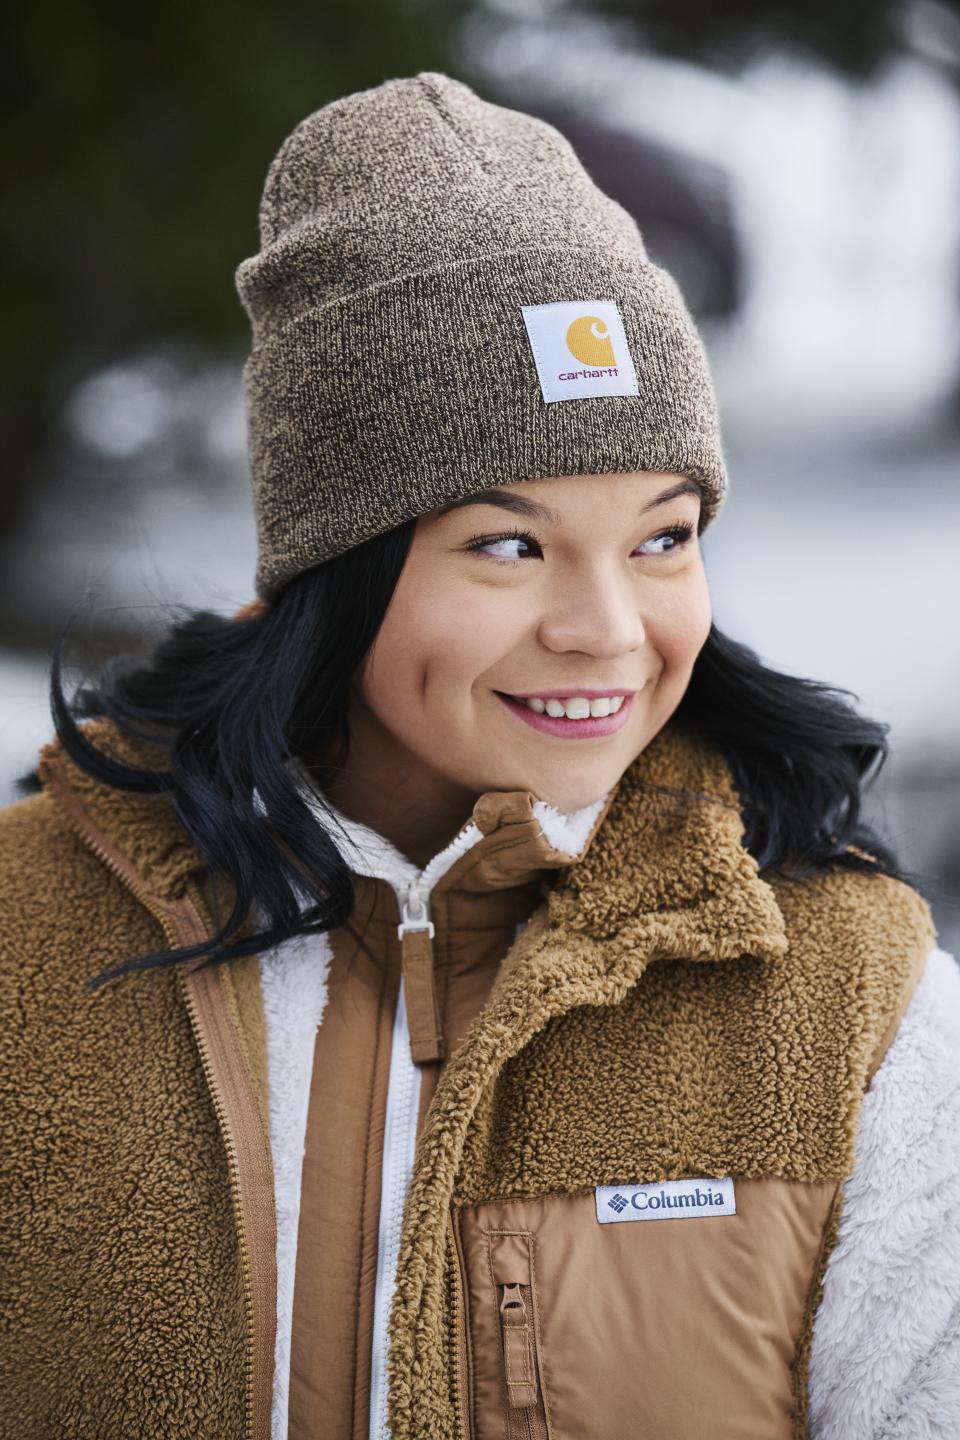 A close up of a smiling woman in a Columbia fleece vest and Carhartt toque